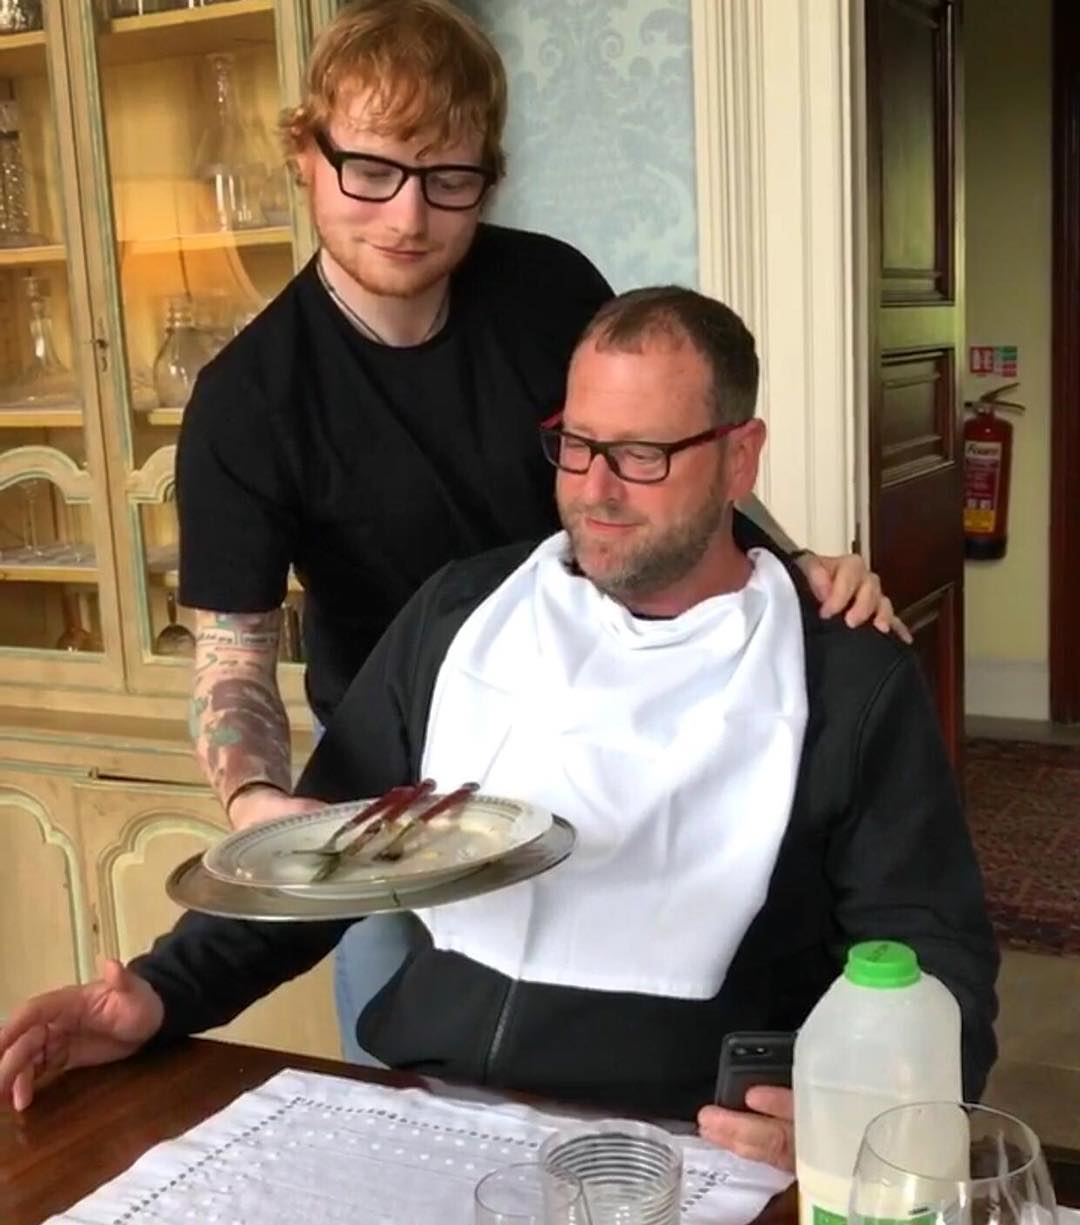 Ed Sheeran's Bodyguard Trolled Him By Posting His Pictures With The Wittiest Captions